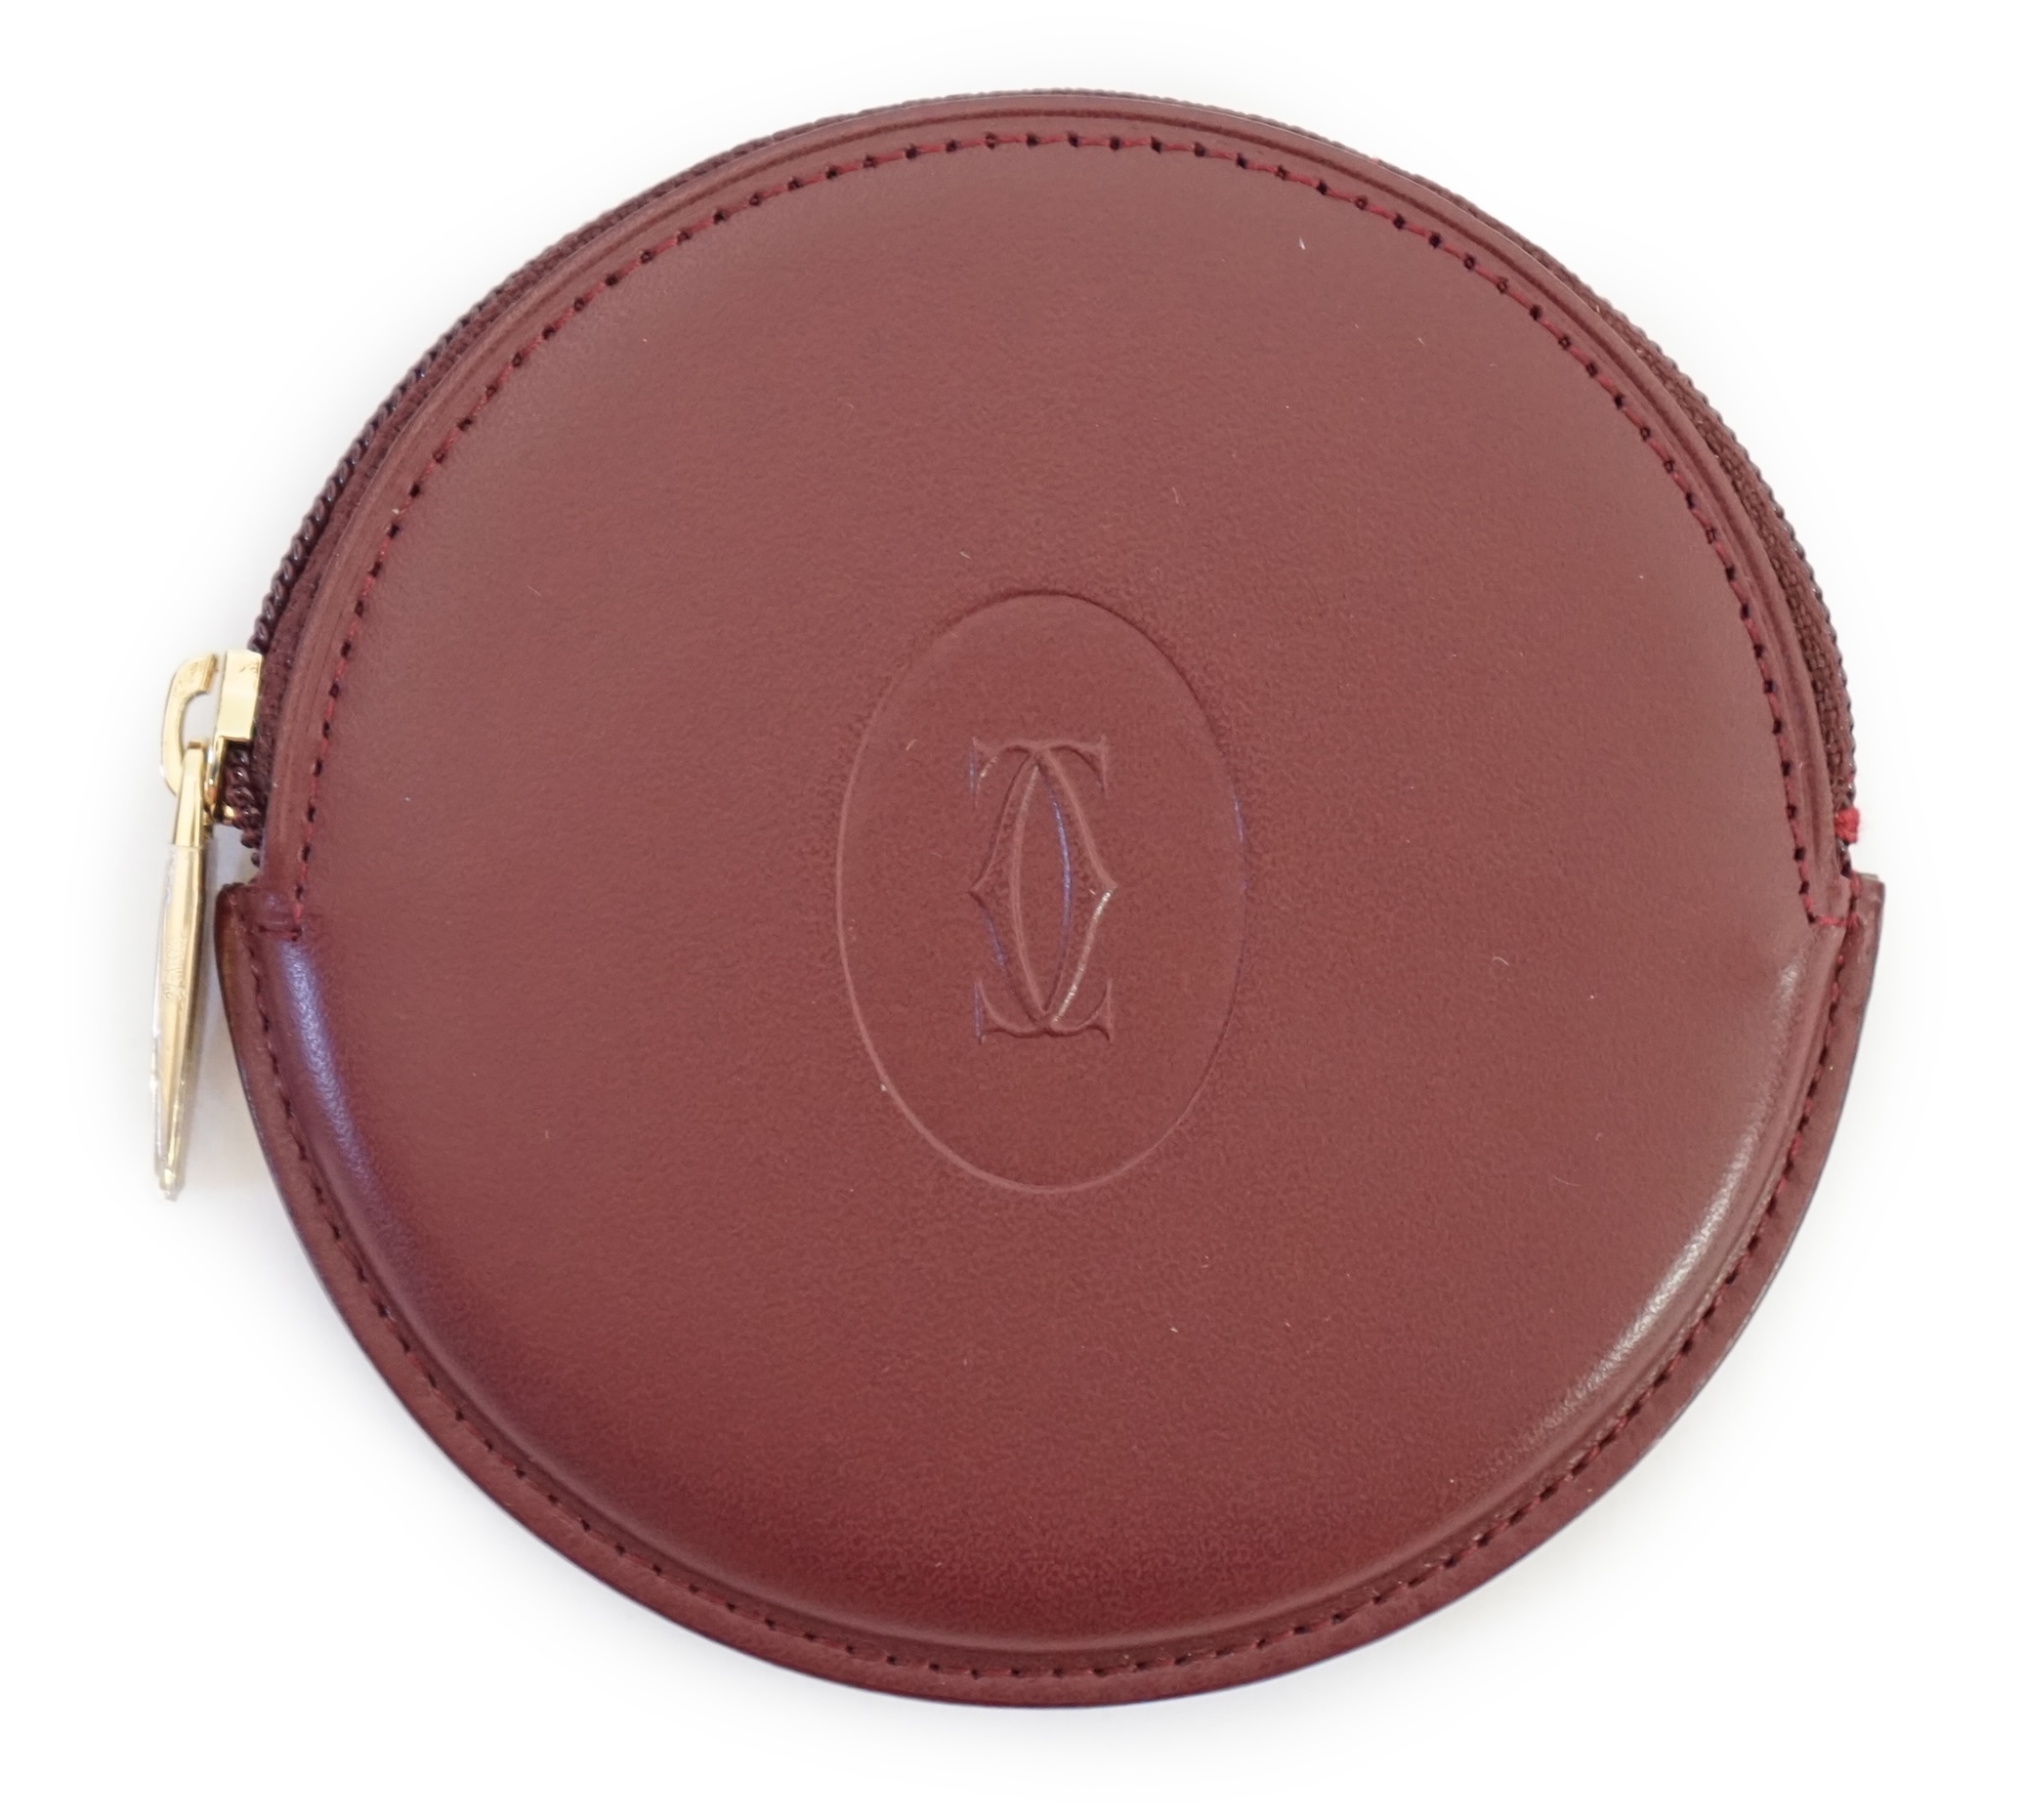 A Cartier maroon leather circular purse with box.